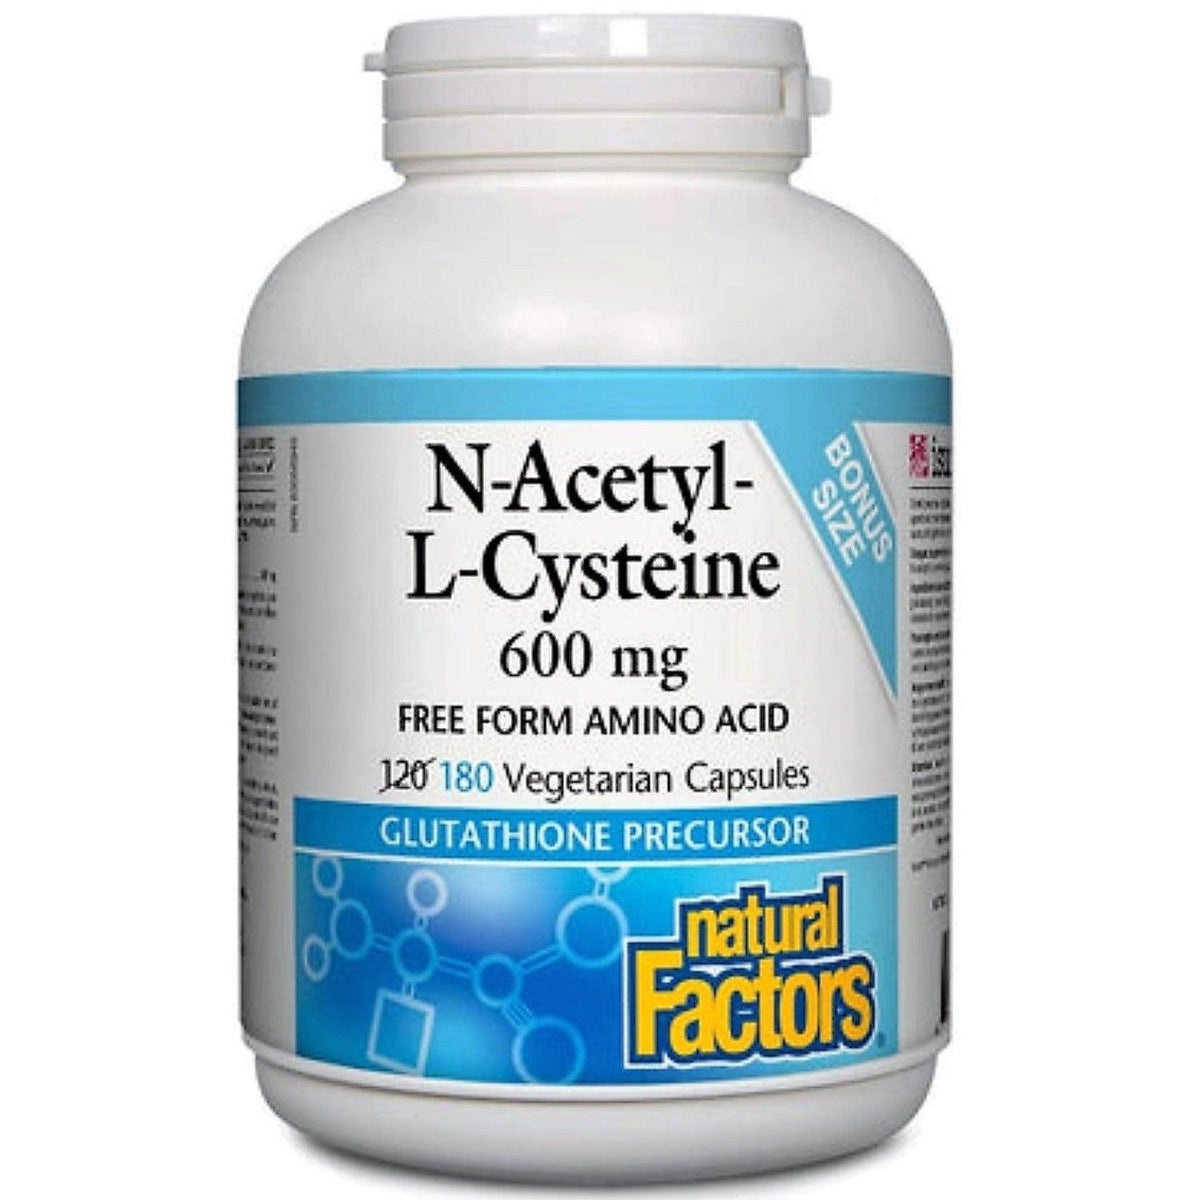 Natural Factors N-Acetyl-L-Cysteine 600mg 180 Caps Supplements - Amino Acids at Village Vitamin Store